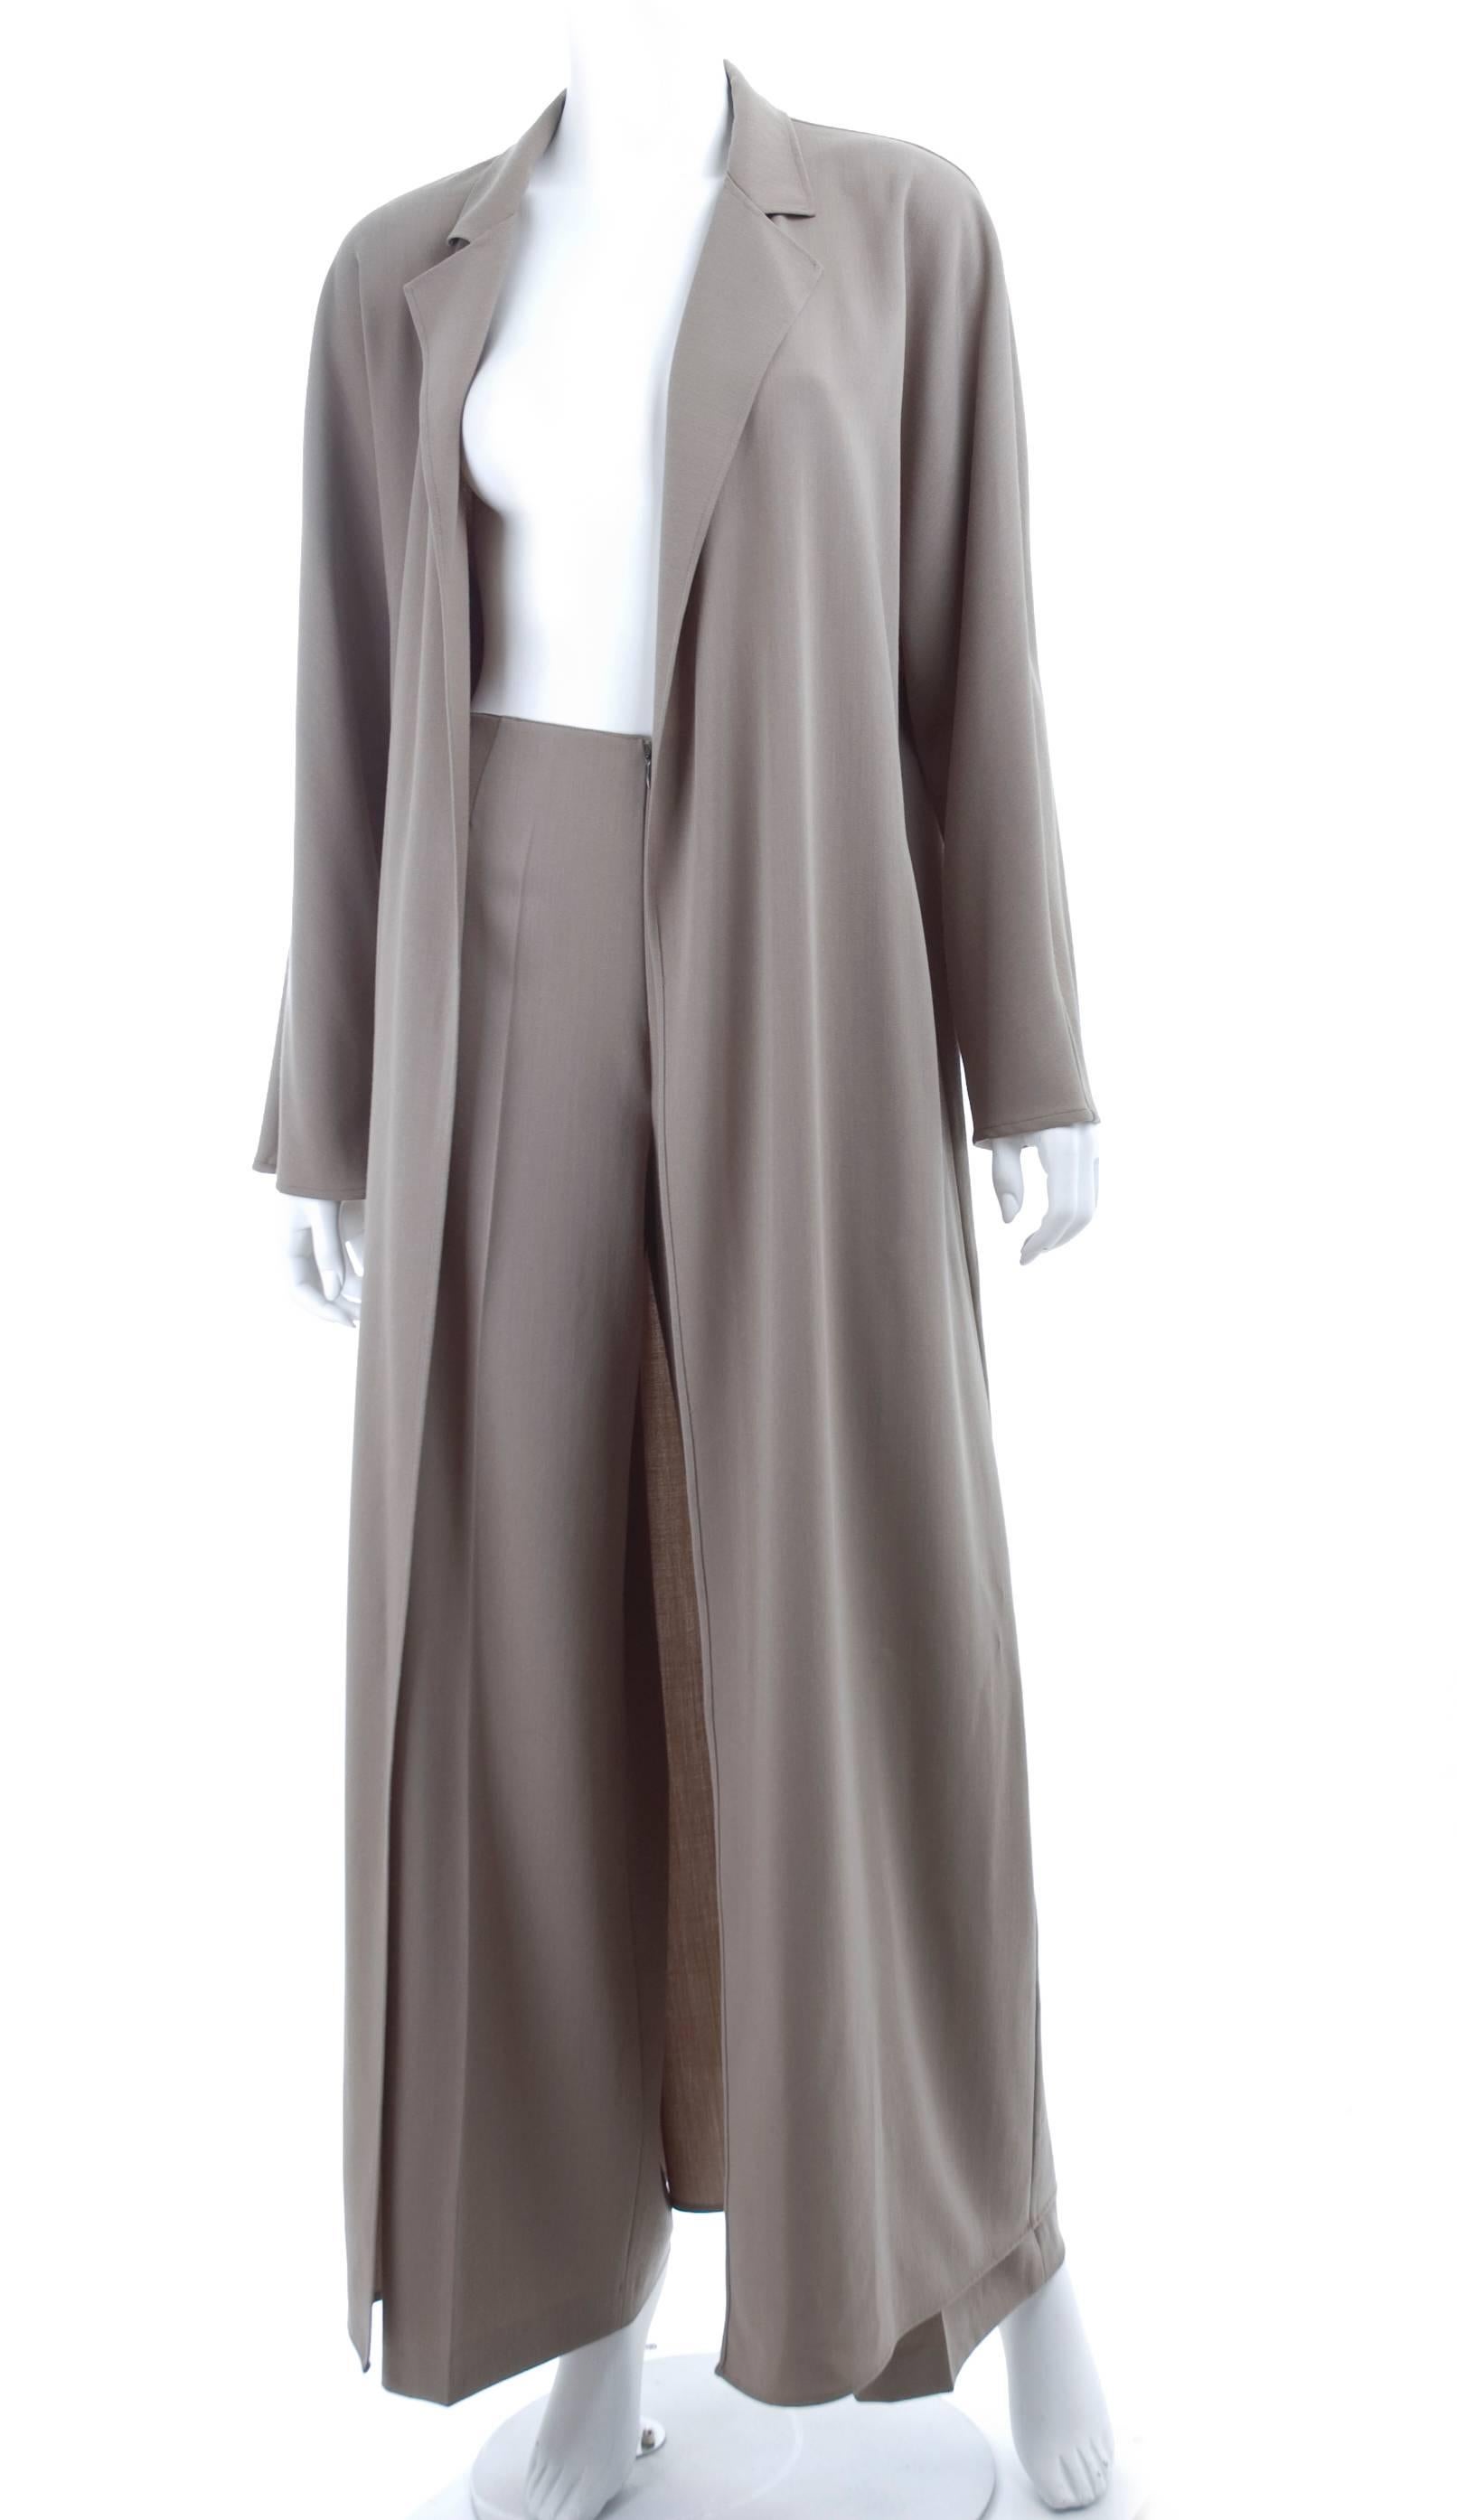 1980s KRIZIA strait long coat and wide leg pants ensemble.
The coat is unlined and the pants zipp up in the front without waistband.
Fine virgin wool in color taupe.
Excellent condition - no flaws to mention.
Size 42 Italy
Measurements:
Coat